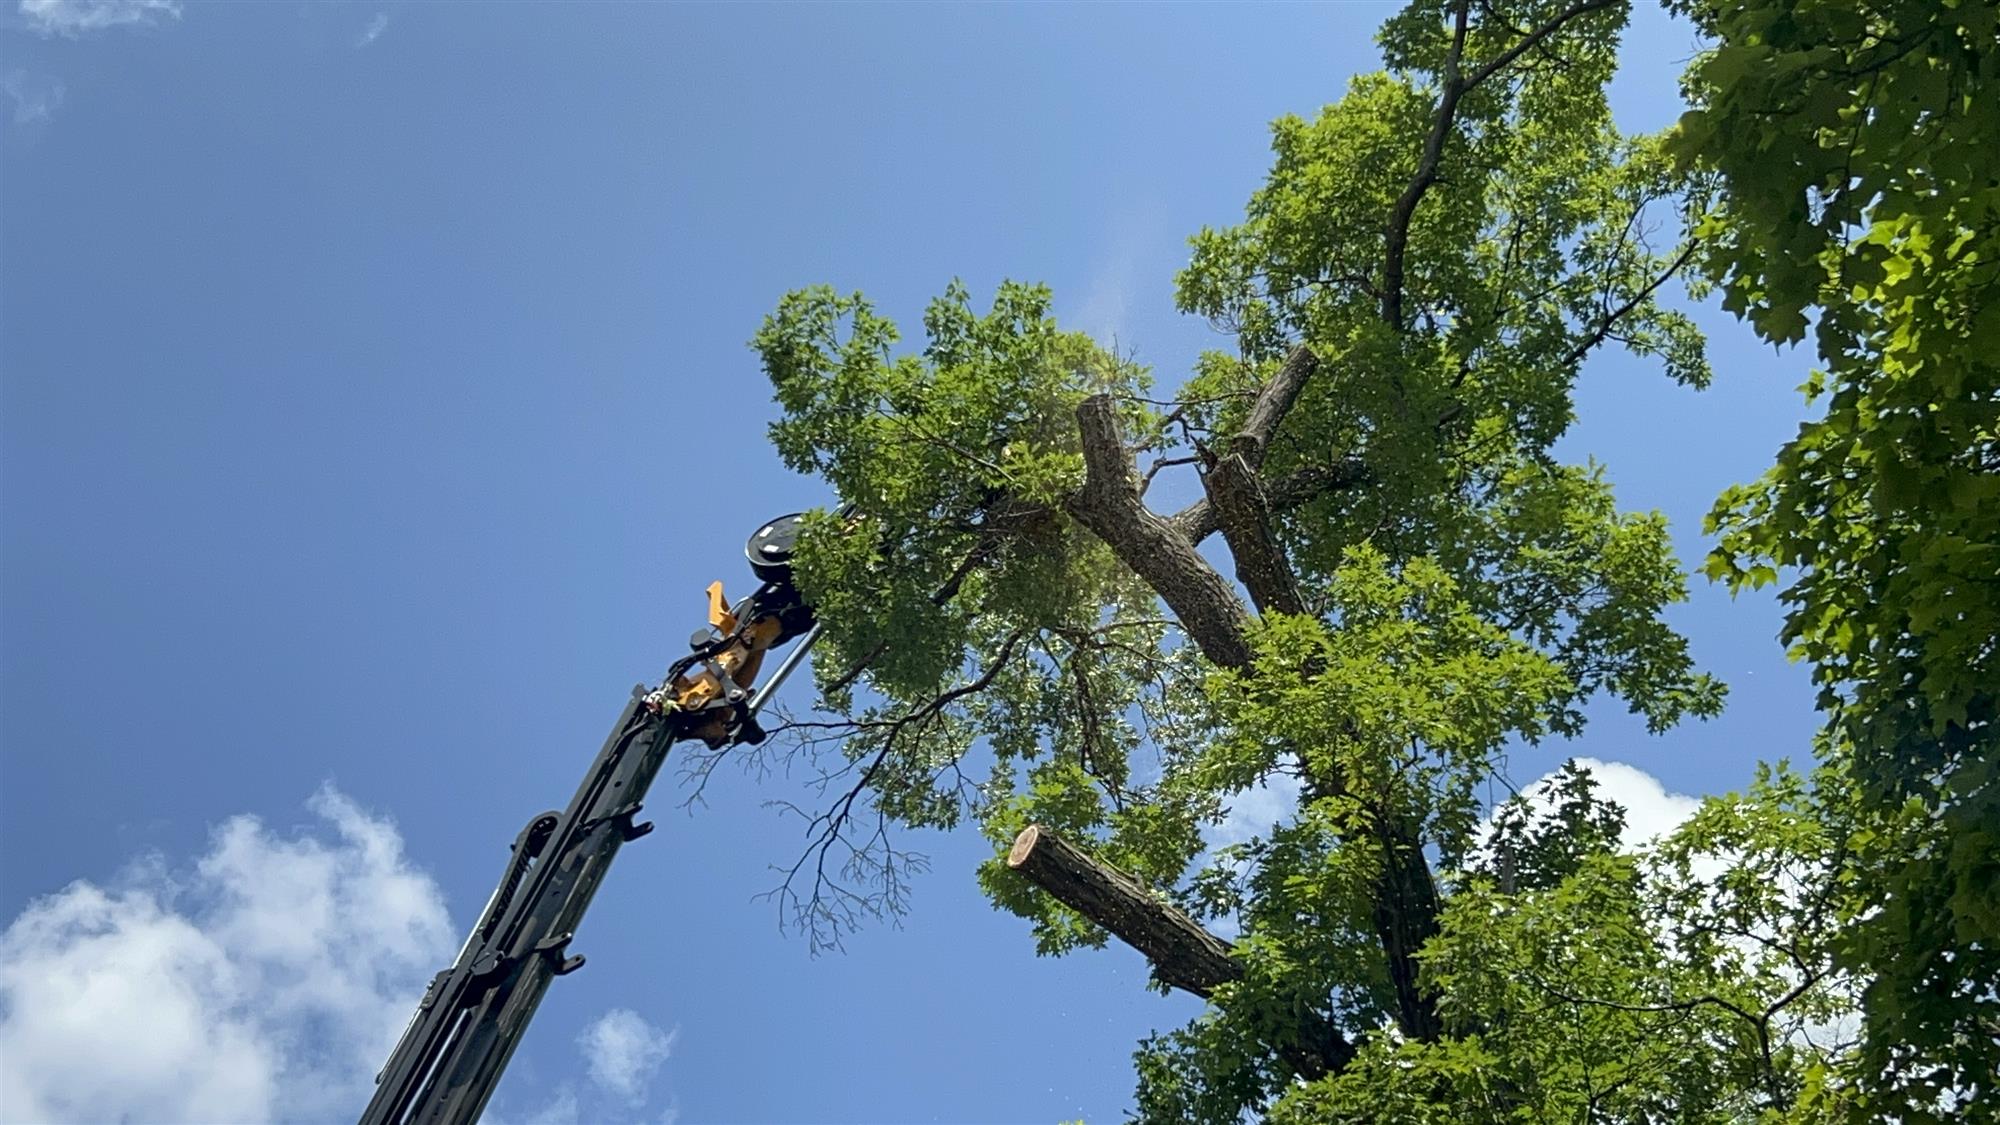 crane operated tree removal for trail clearing in SE WI